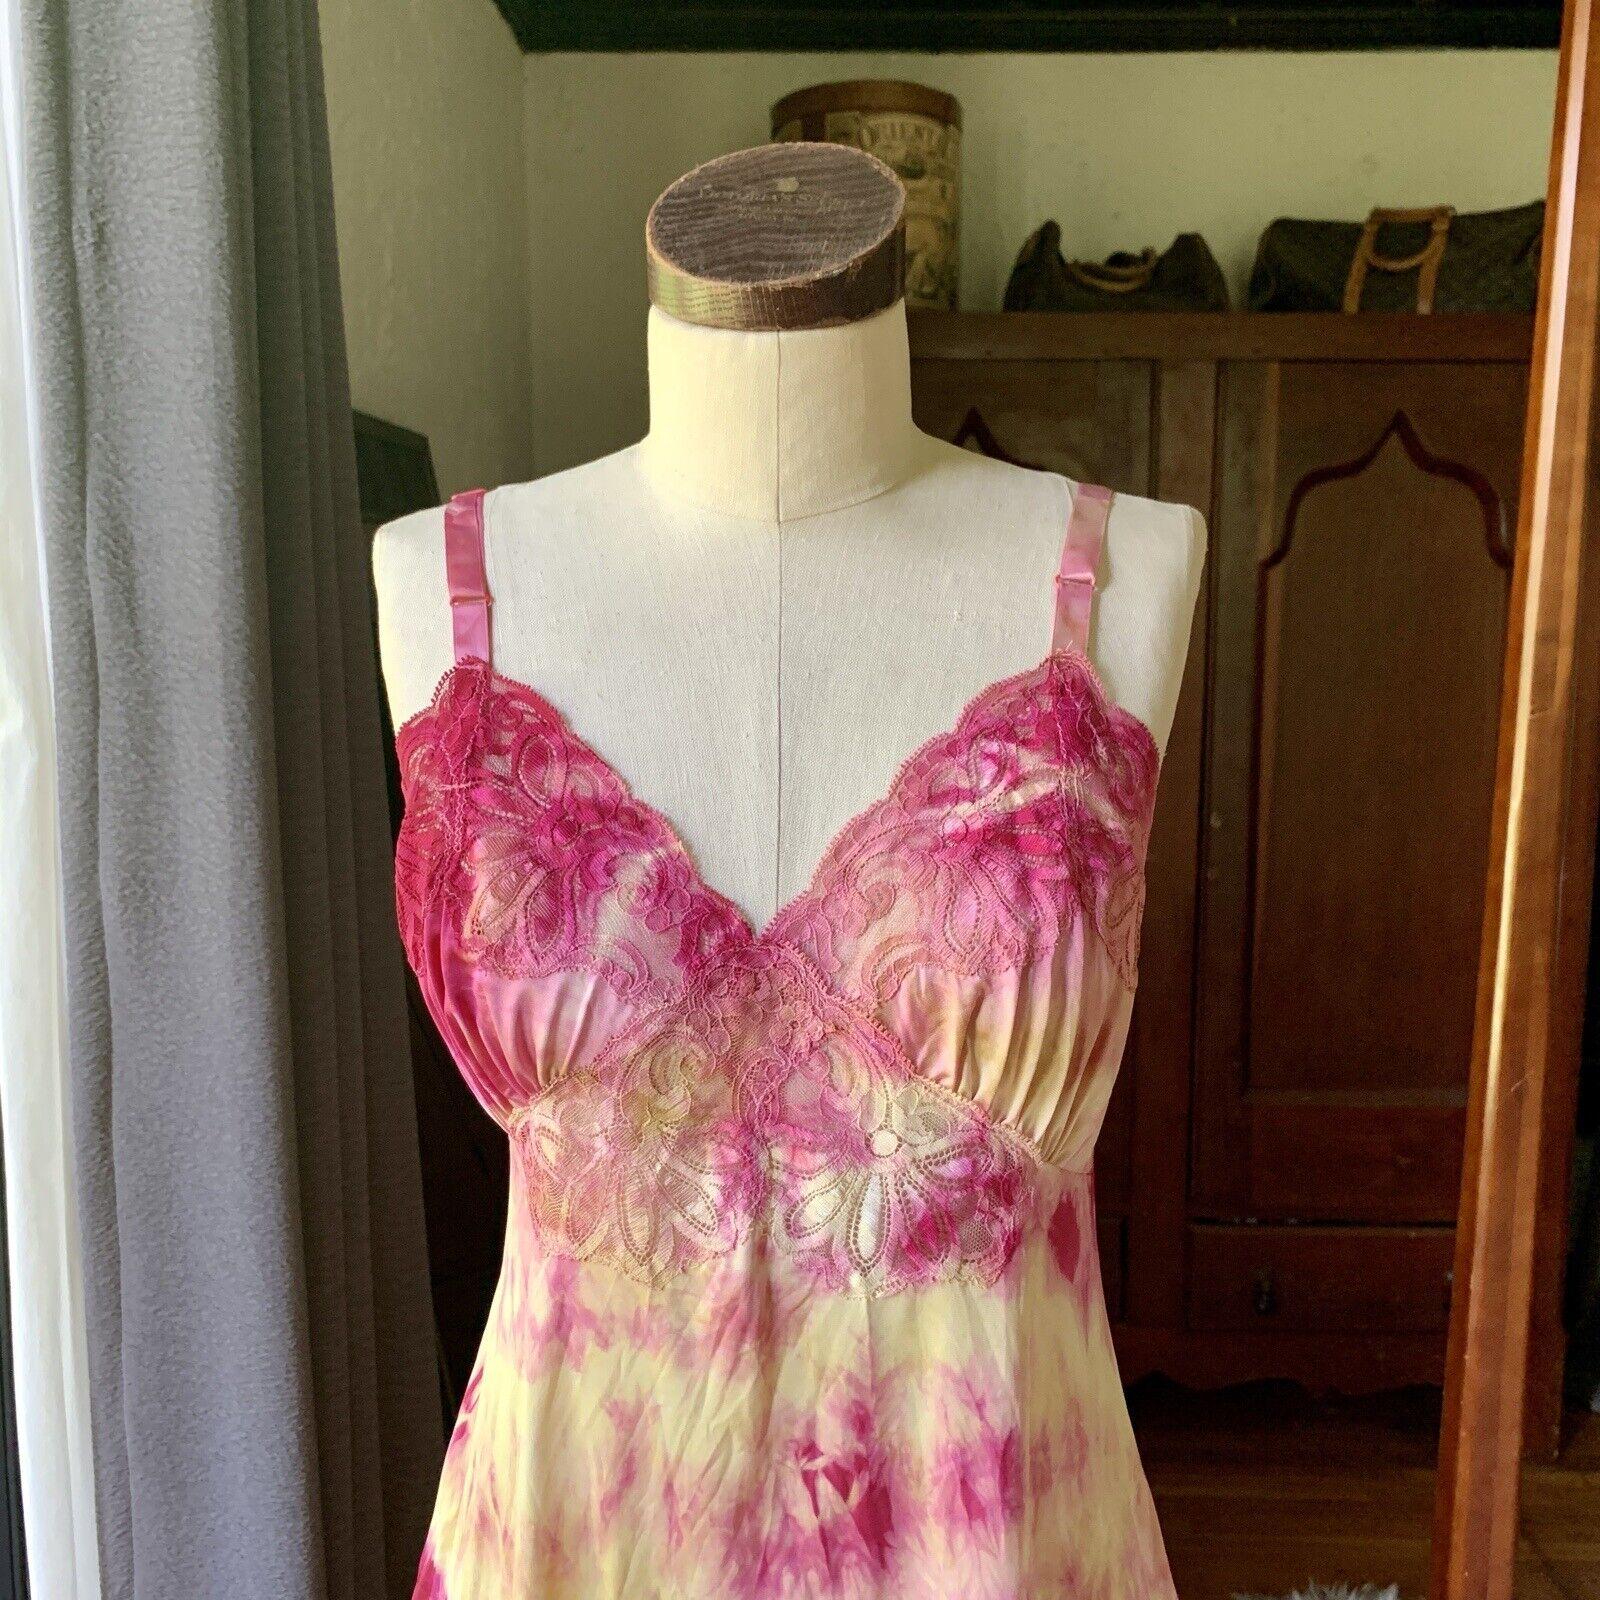 The DYED PETALS Collection (vintage, upcycled, and custom-made fashion using natural dyes and colorants), is designed and offered exclusively by PARPARIAN.

Hand-dyed with Turmeric, Beets, Roses
Vintage Brand: Shadowline
Adjustable Straps, Lace Top